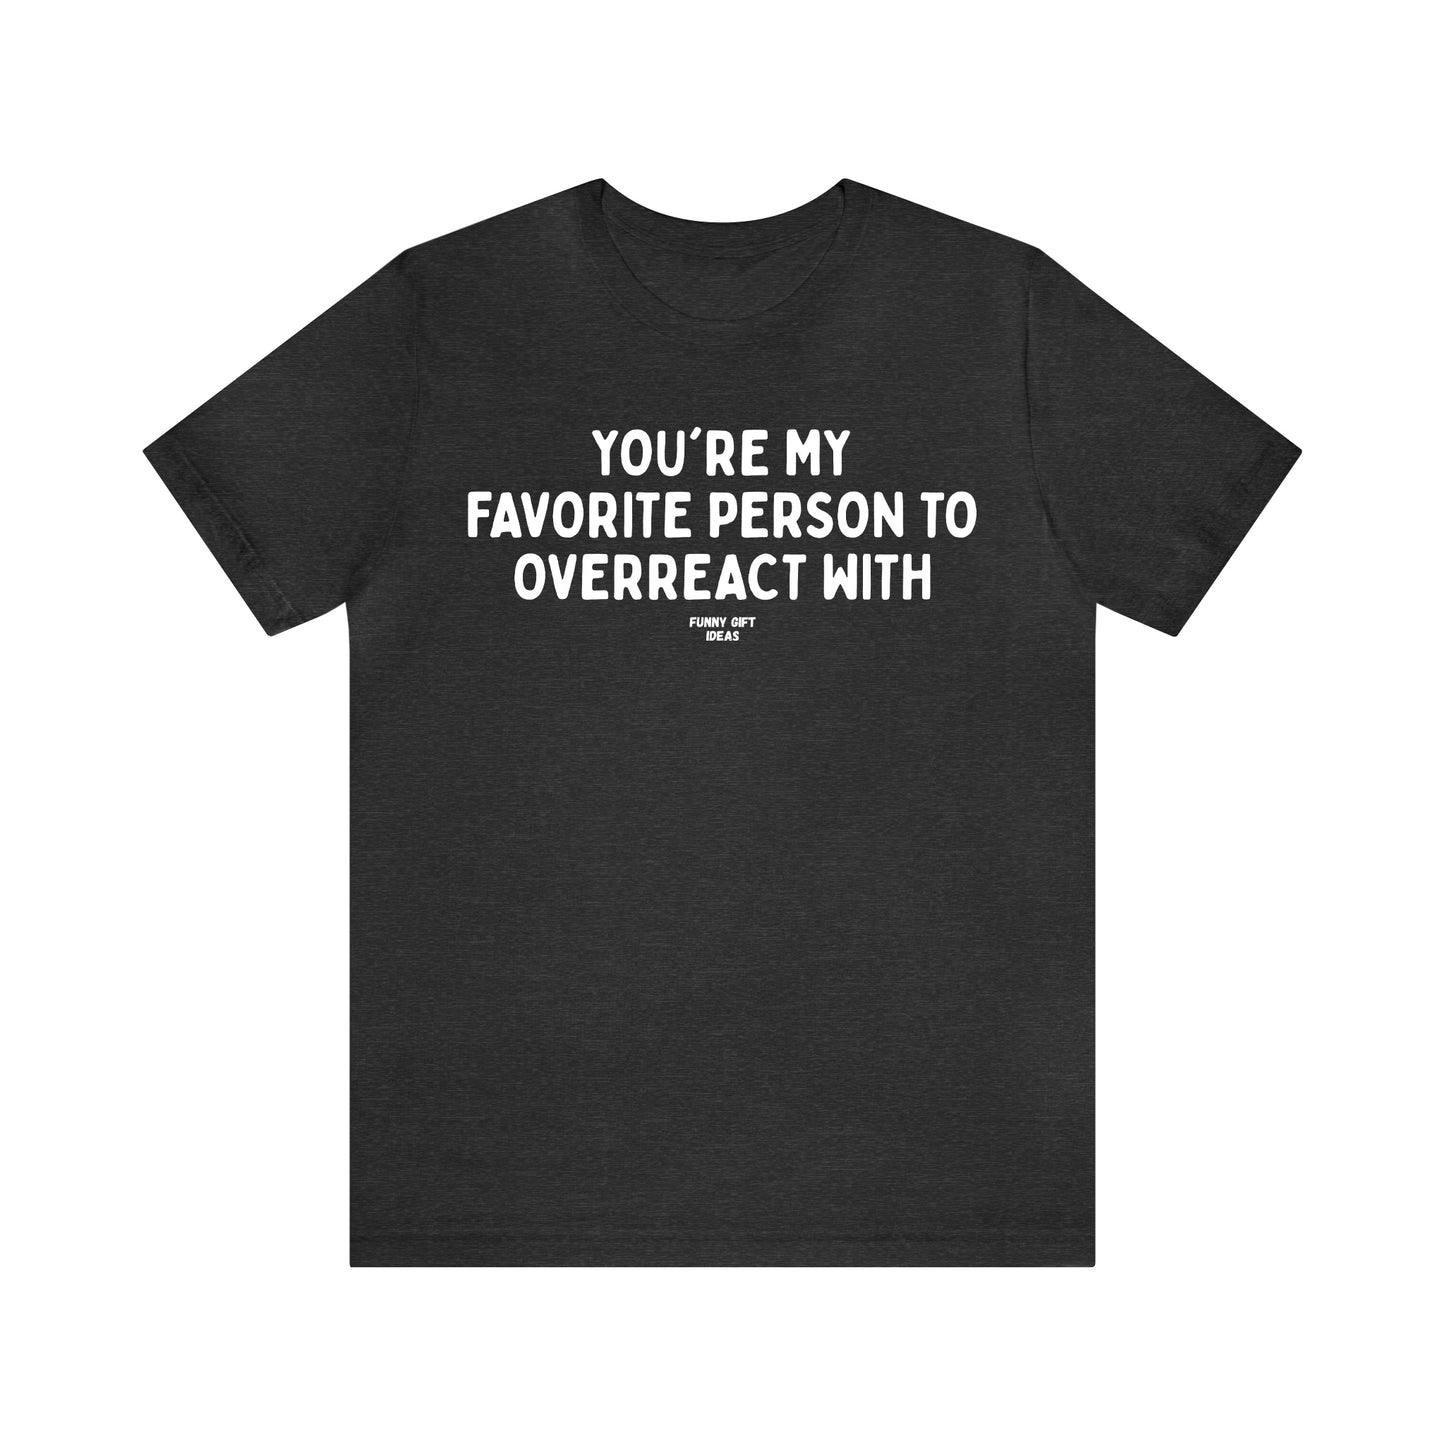 Funny Shirts for Women - You're My Favorite Person to Overreact With - Women's T Shirts